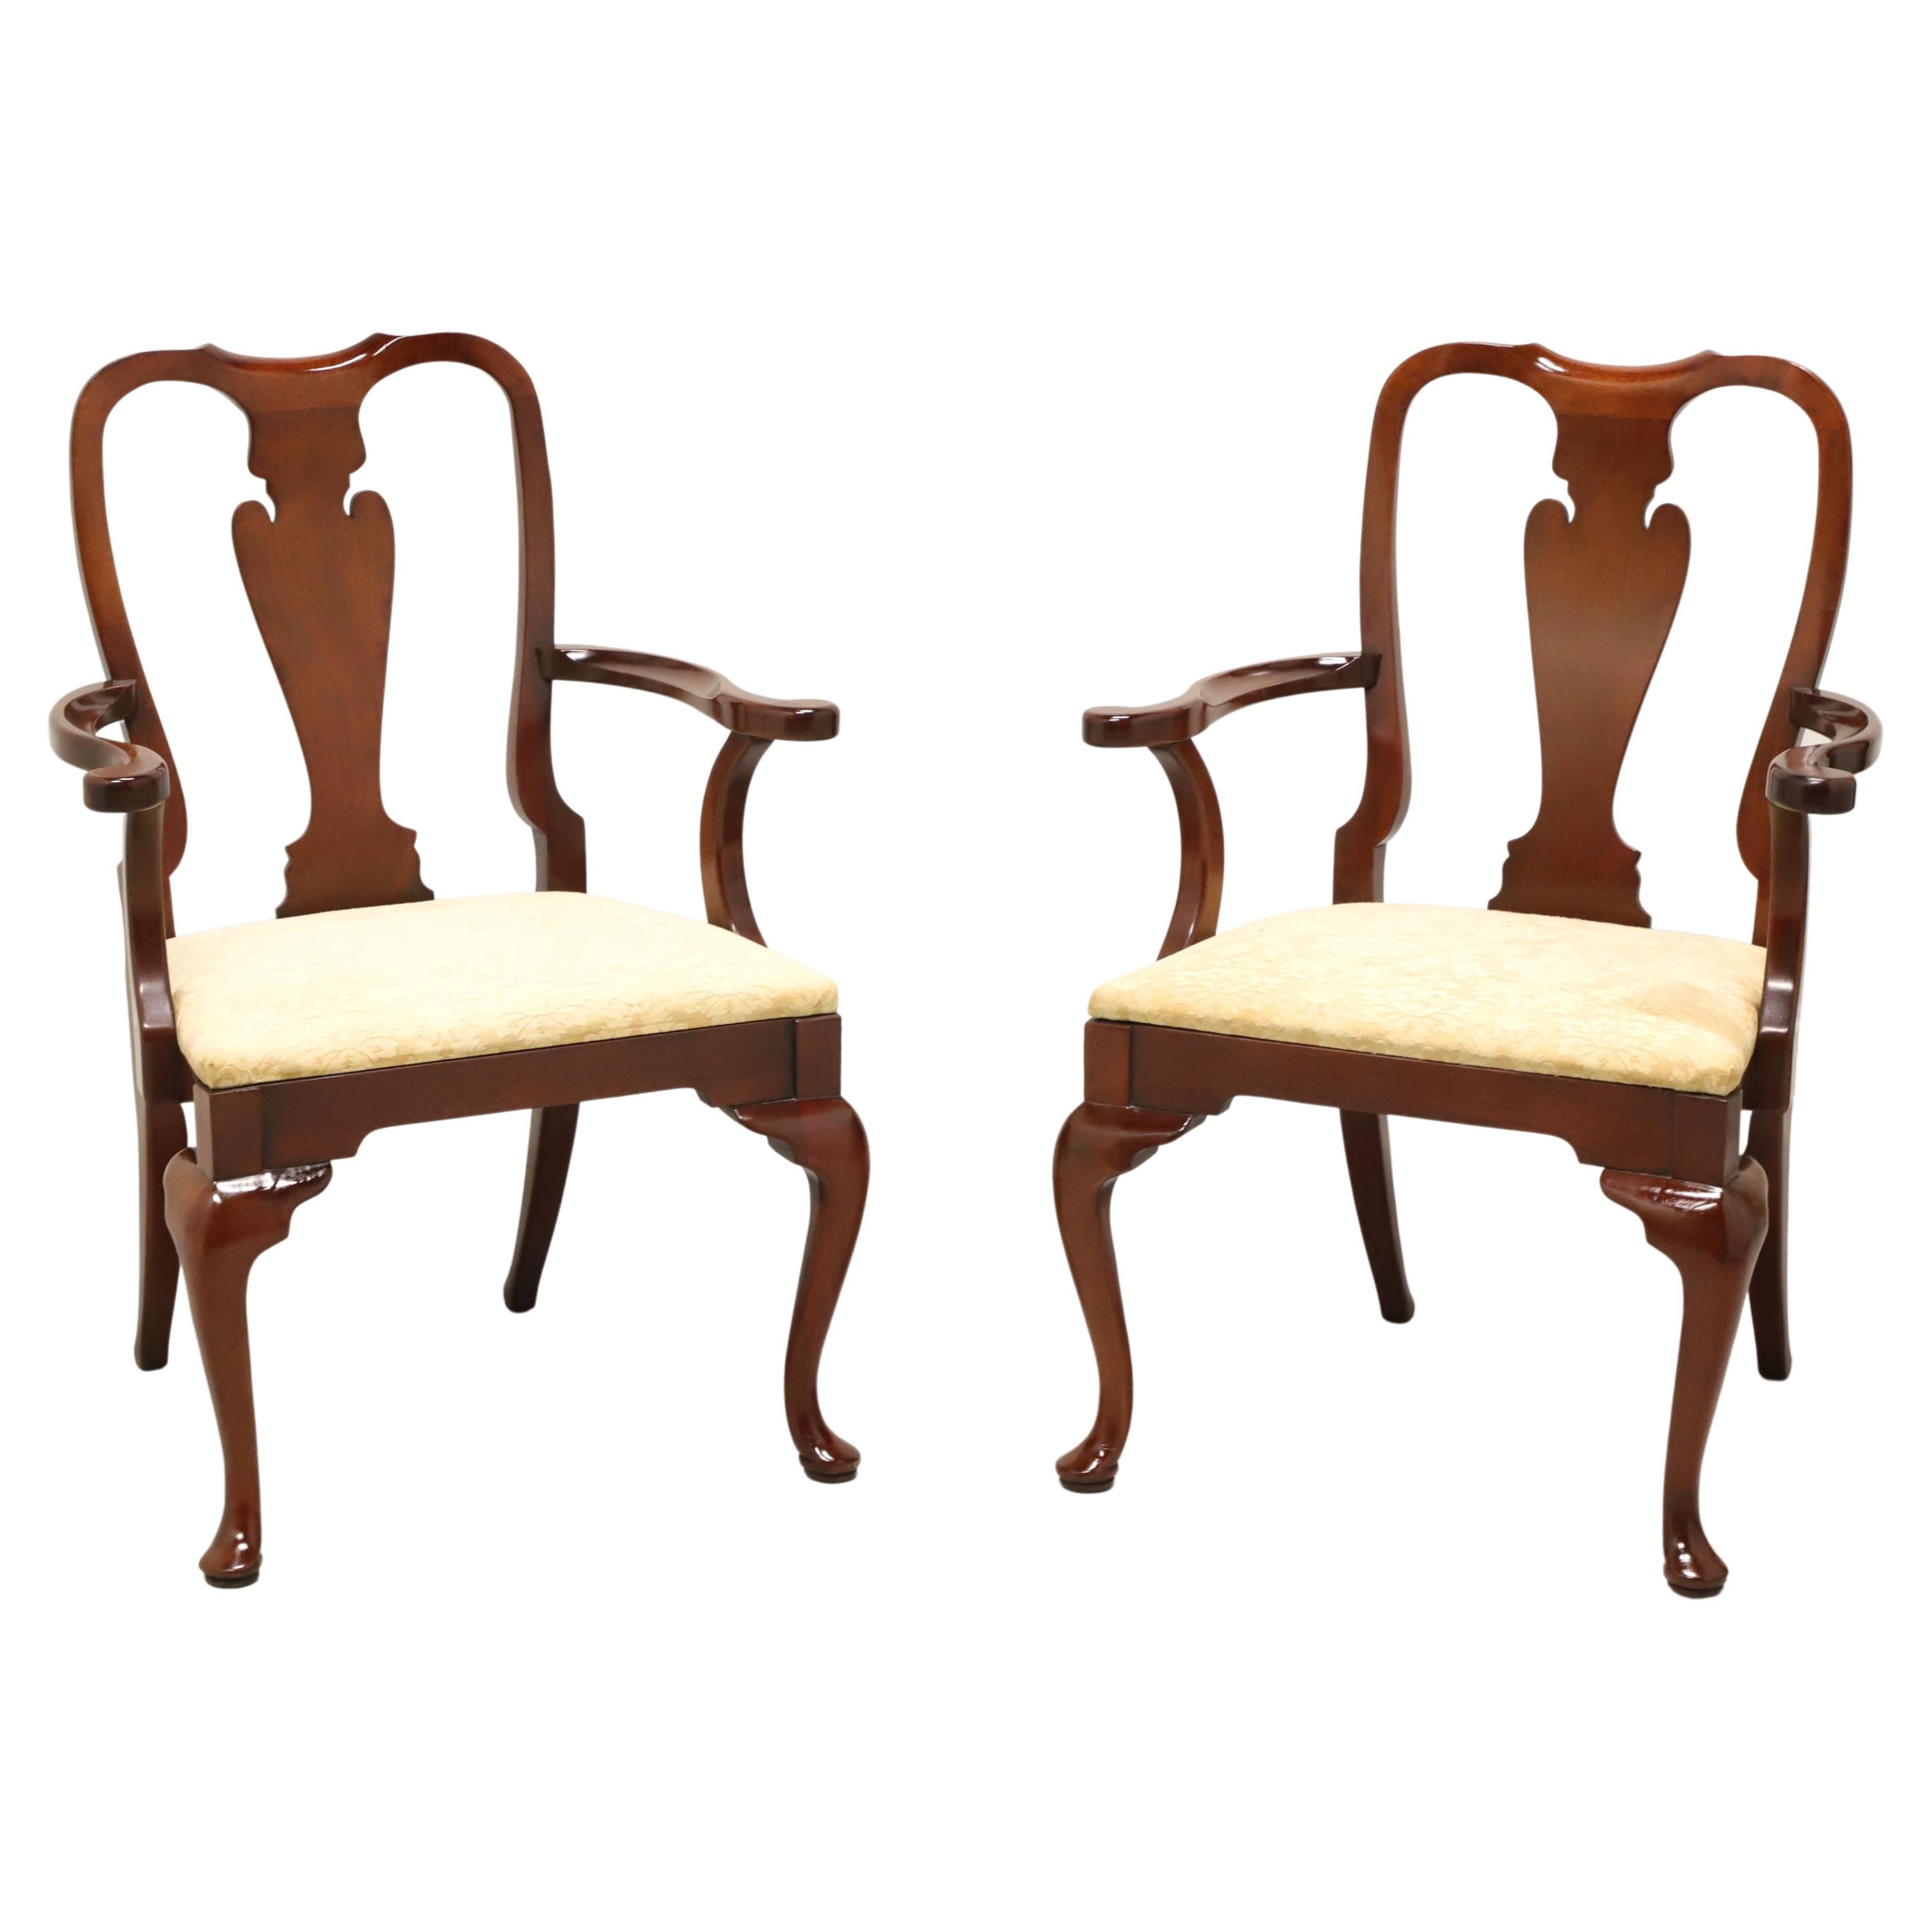 HICKORY CHAIR Amber Mahogany Queen Anne Dining Armchairs - Pair